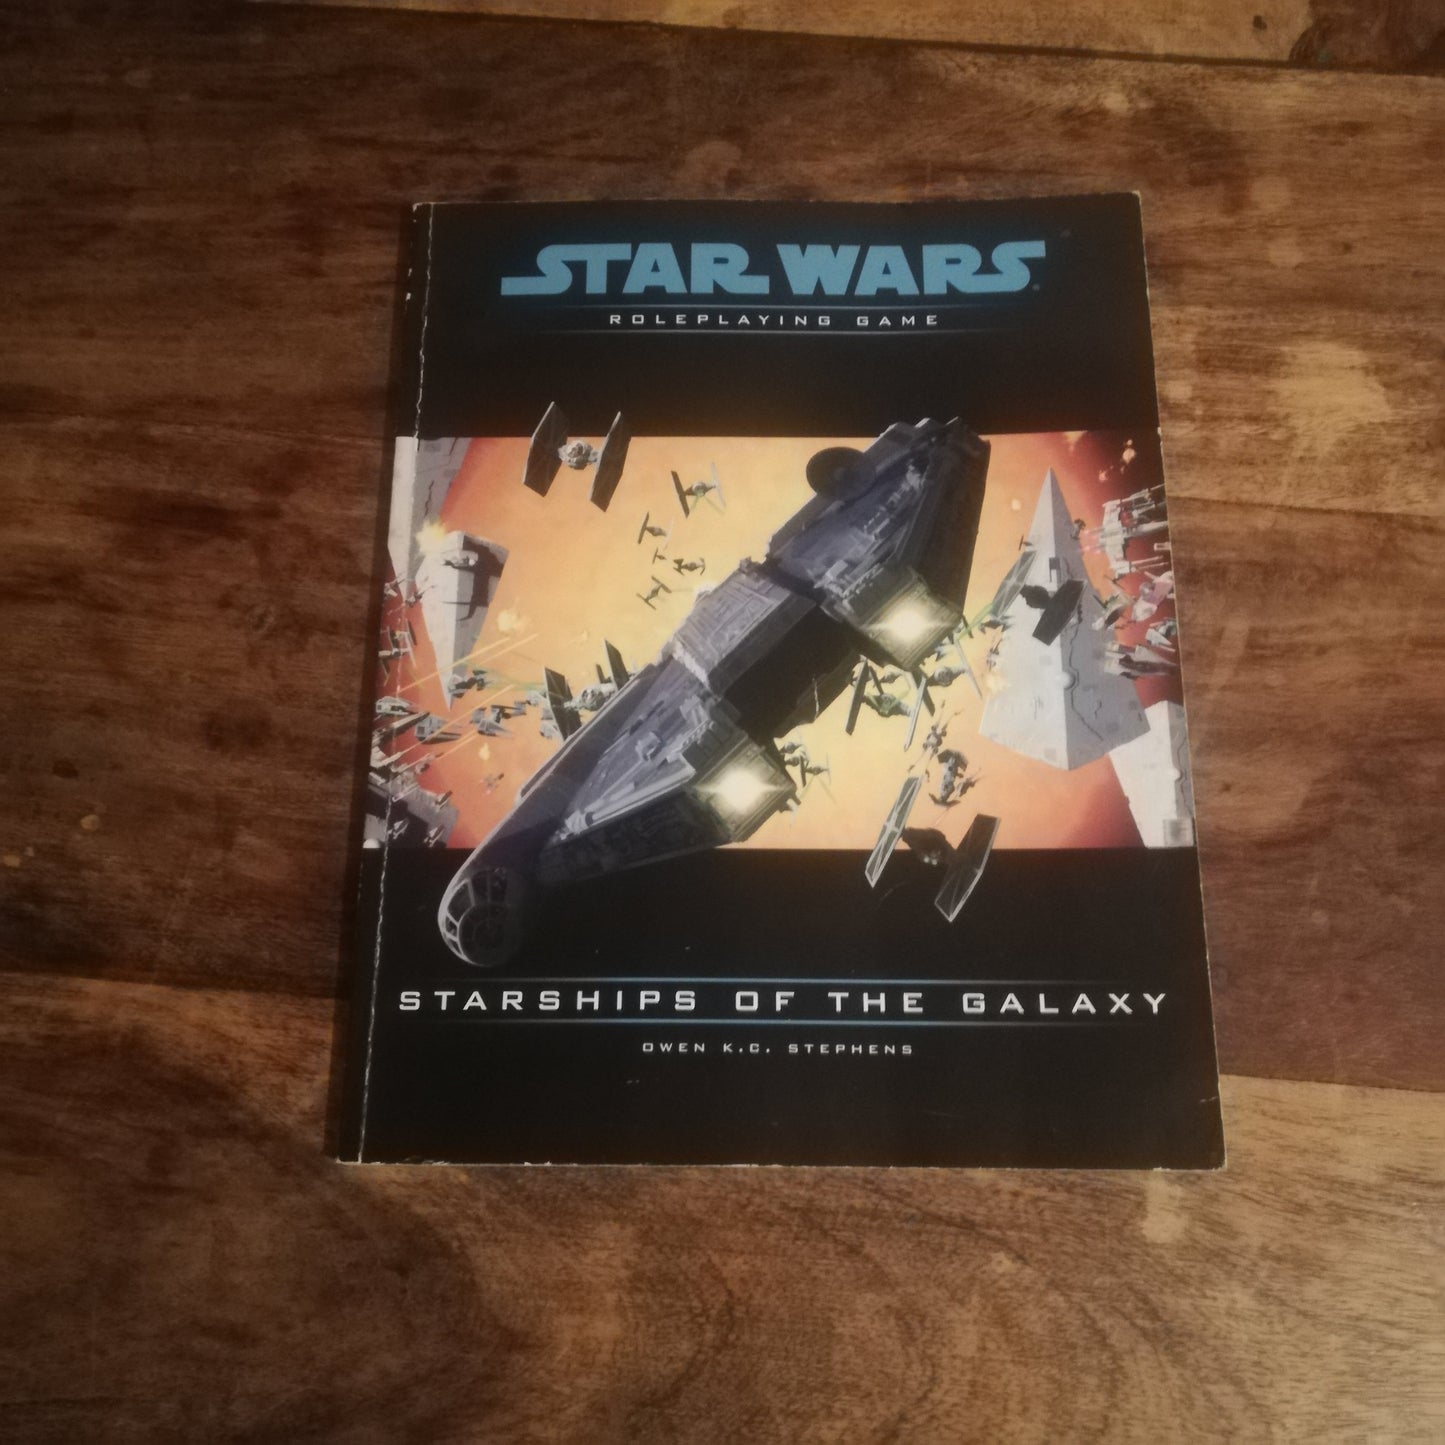 Star Wars d20 Starships of the Galaxy - AllRoleplaying.com